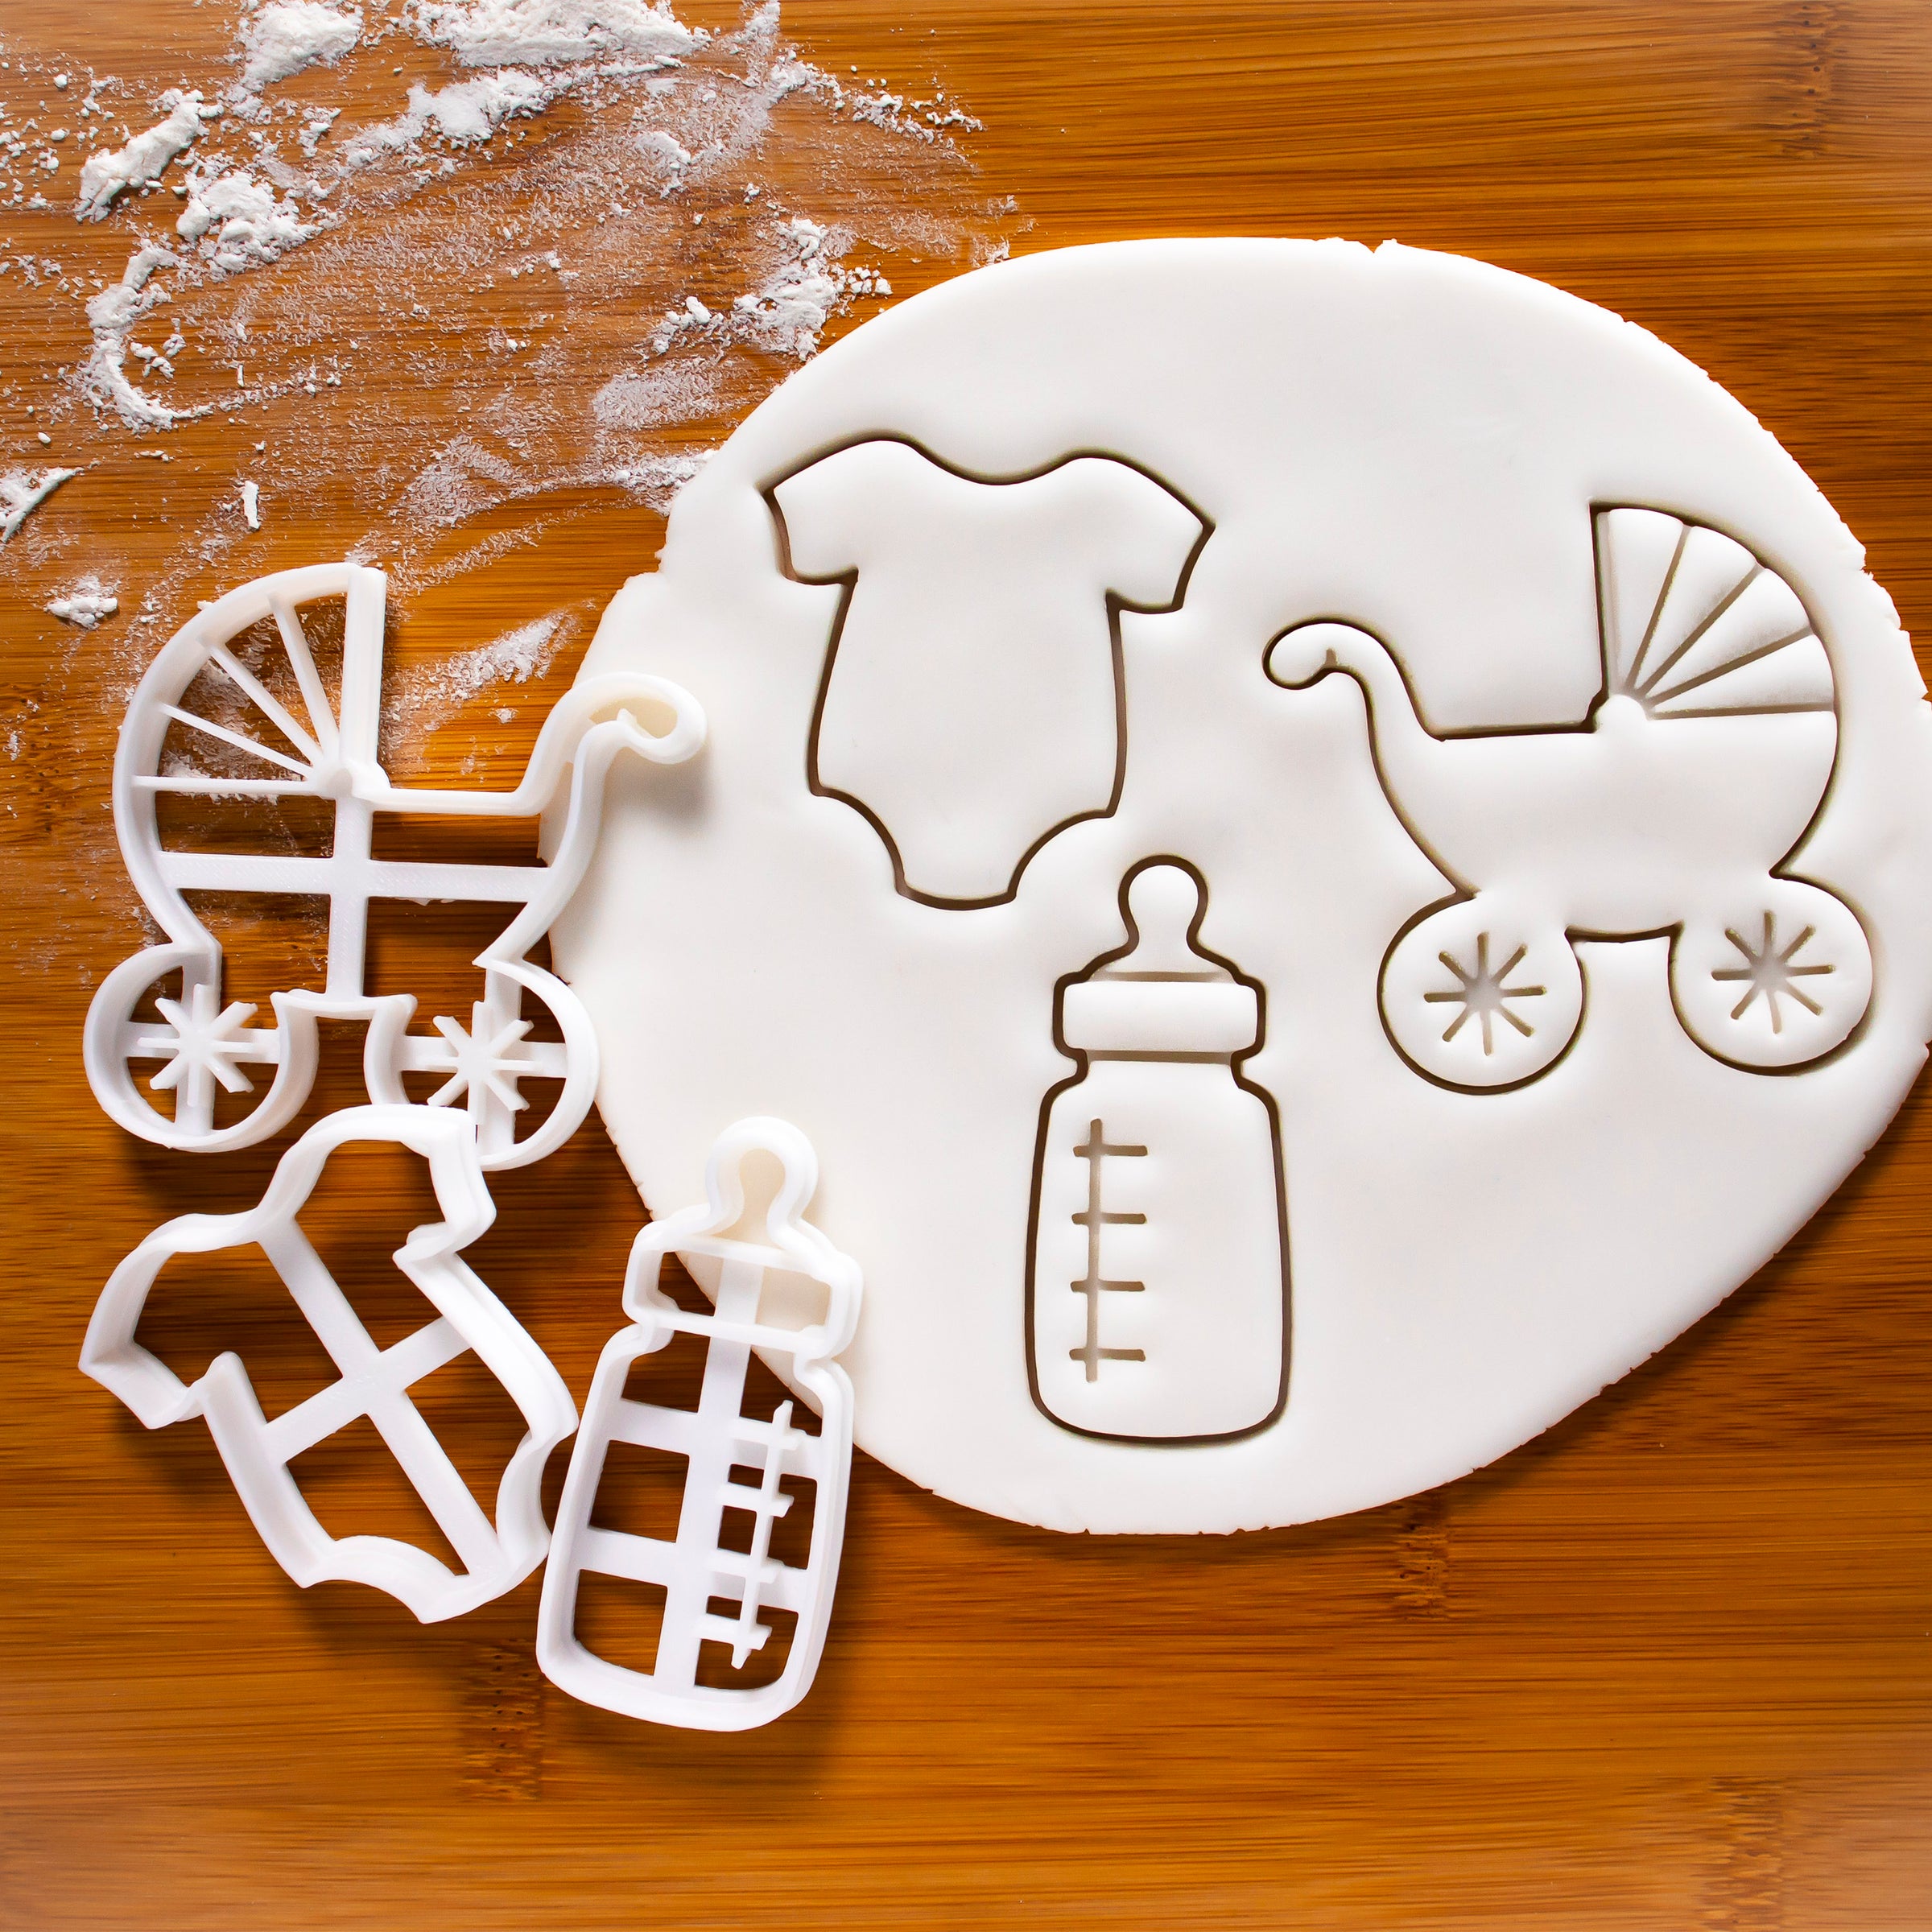 set of 3 baby shower cookie cutters: Baby pram, baby bottle, and baby clothes cookie cutters